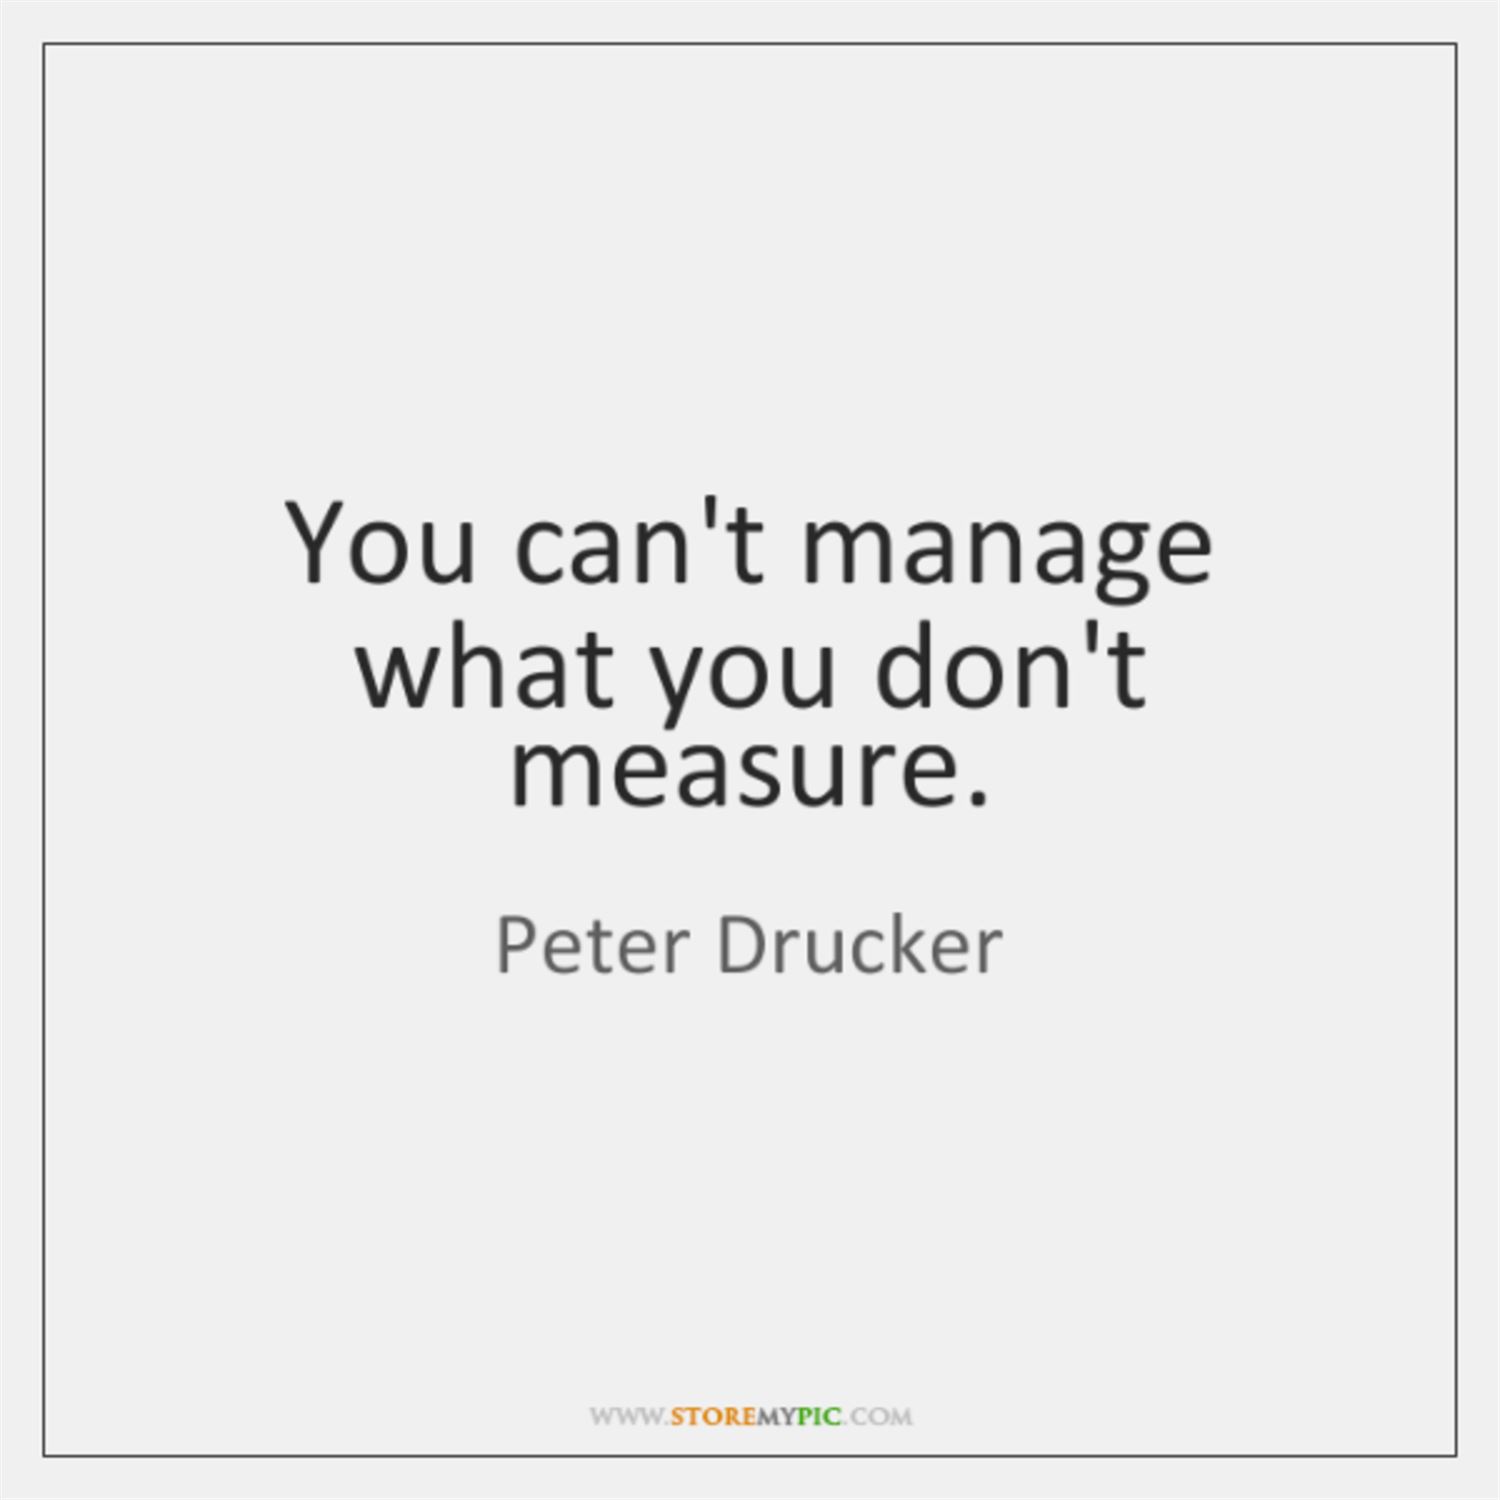 What doesn't get measured, doesn't get managed